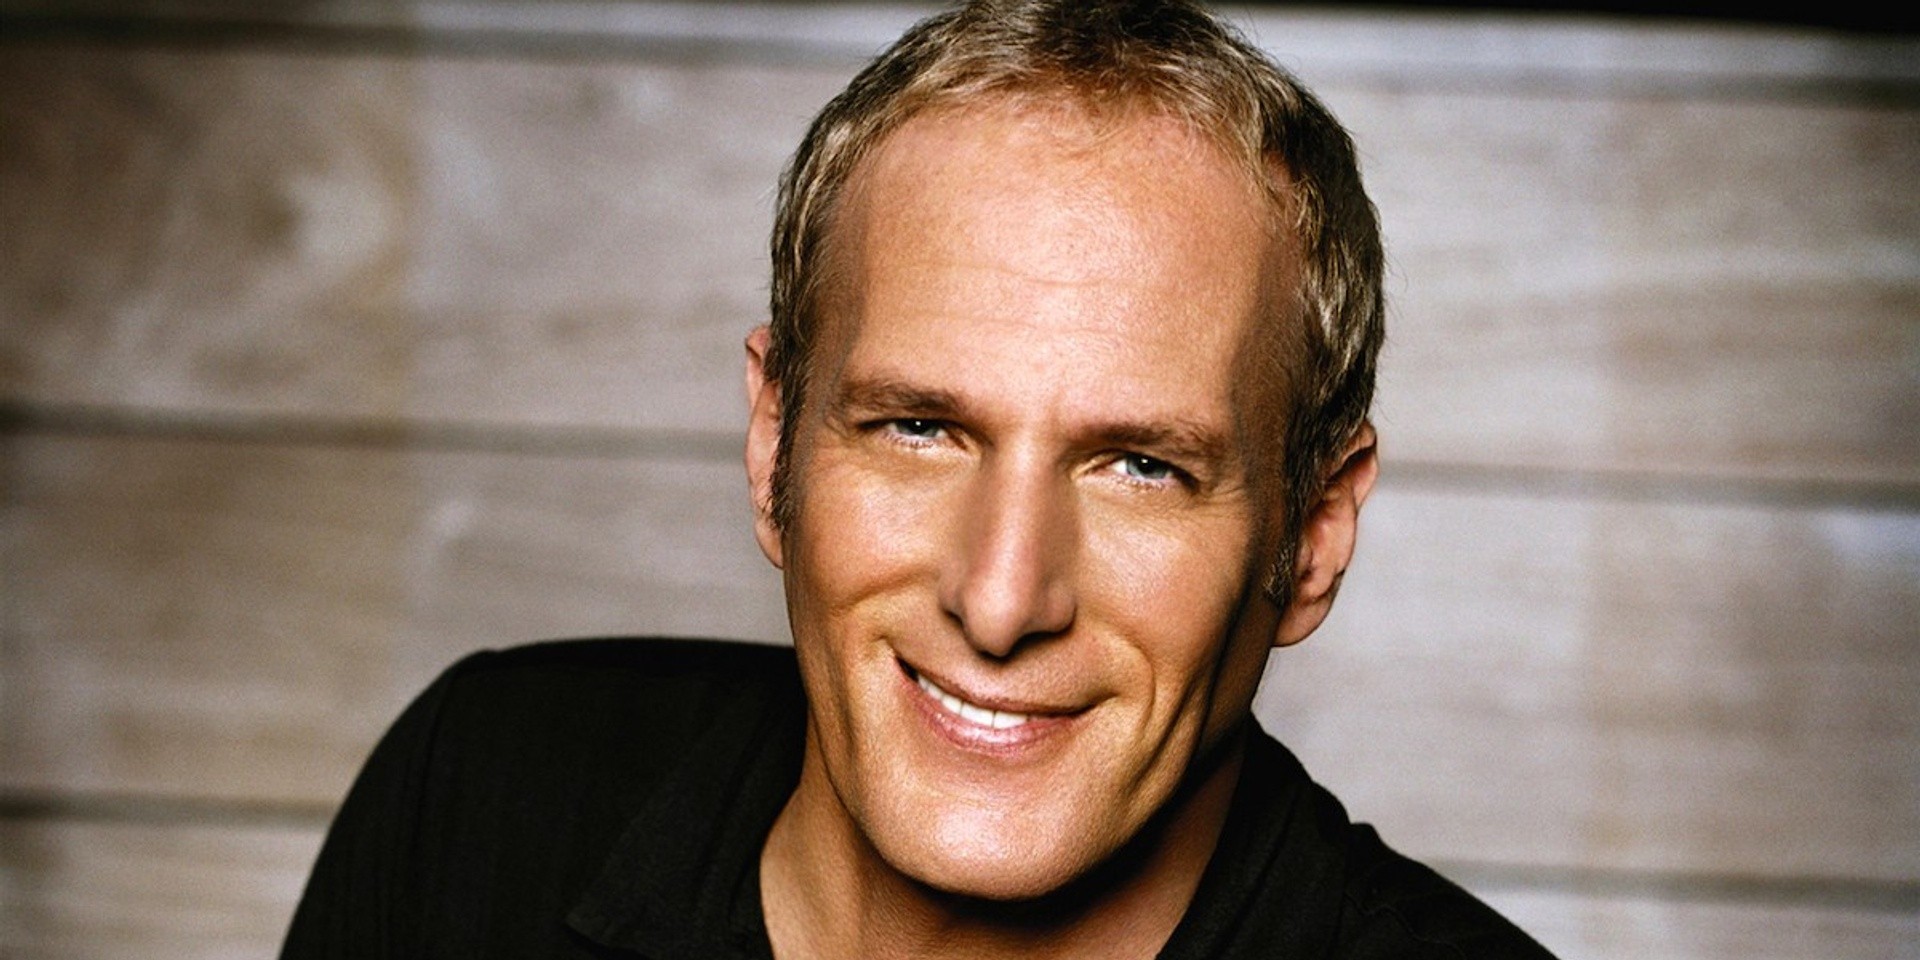 Michael Bolton set for Southeast Asian tour, to perform in Singapore, Manila and Bangkok